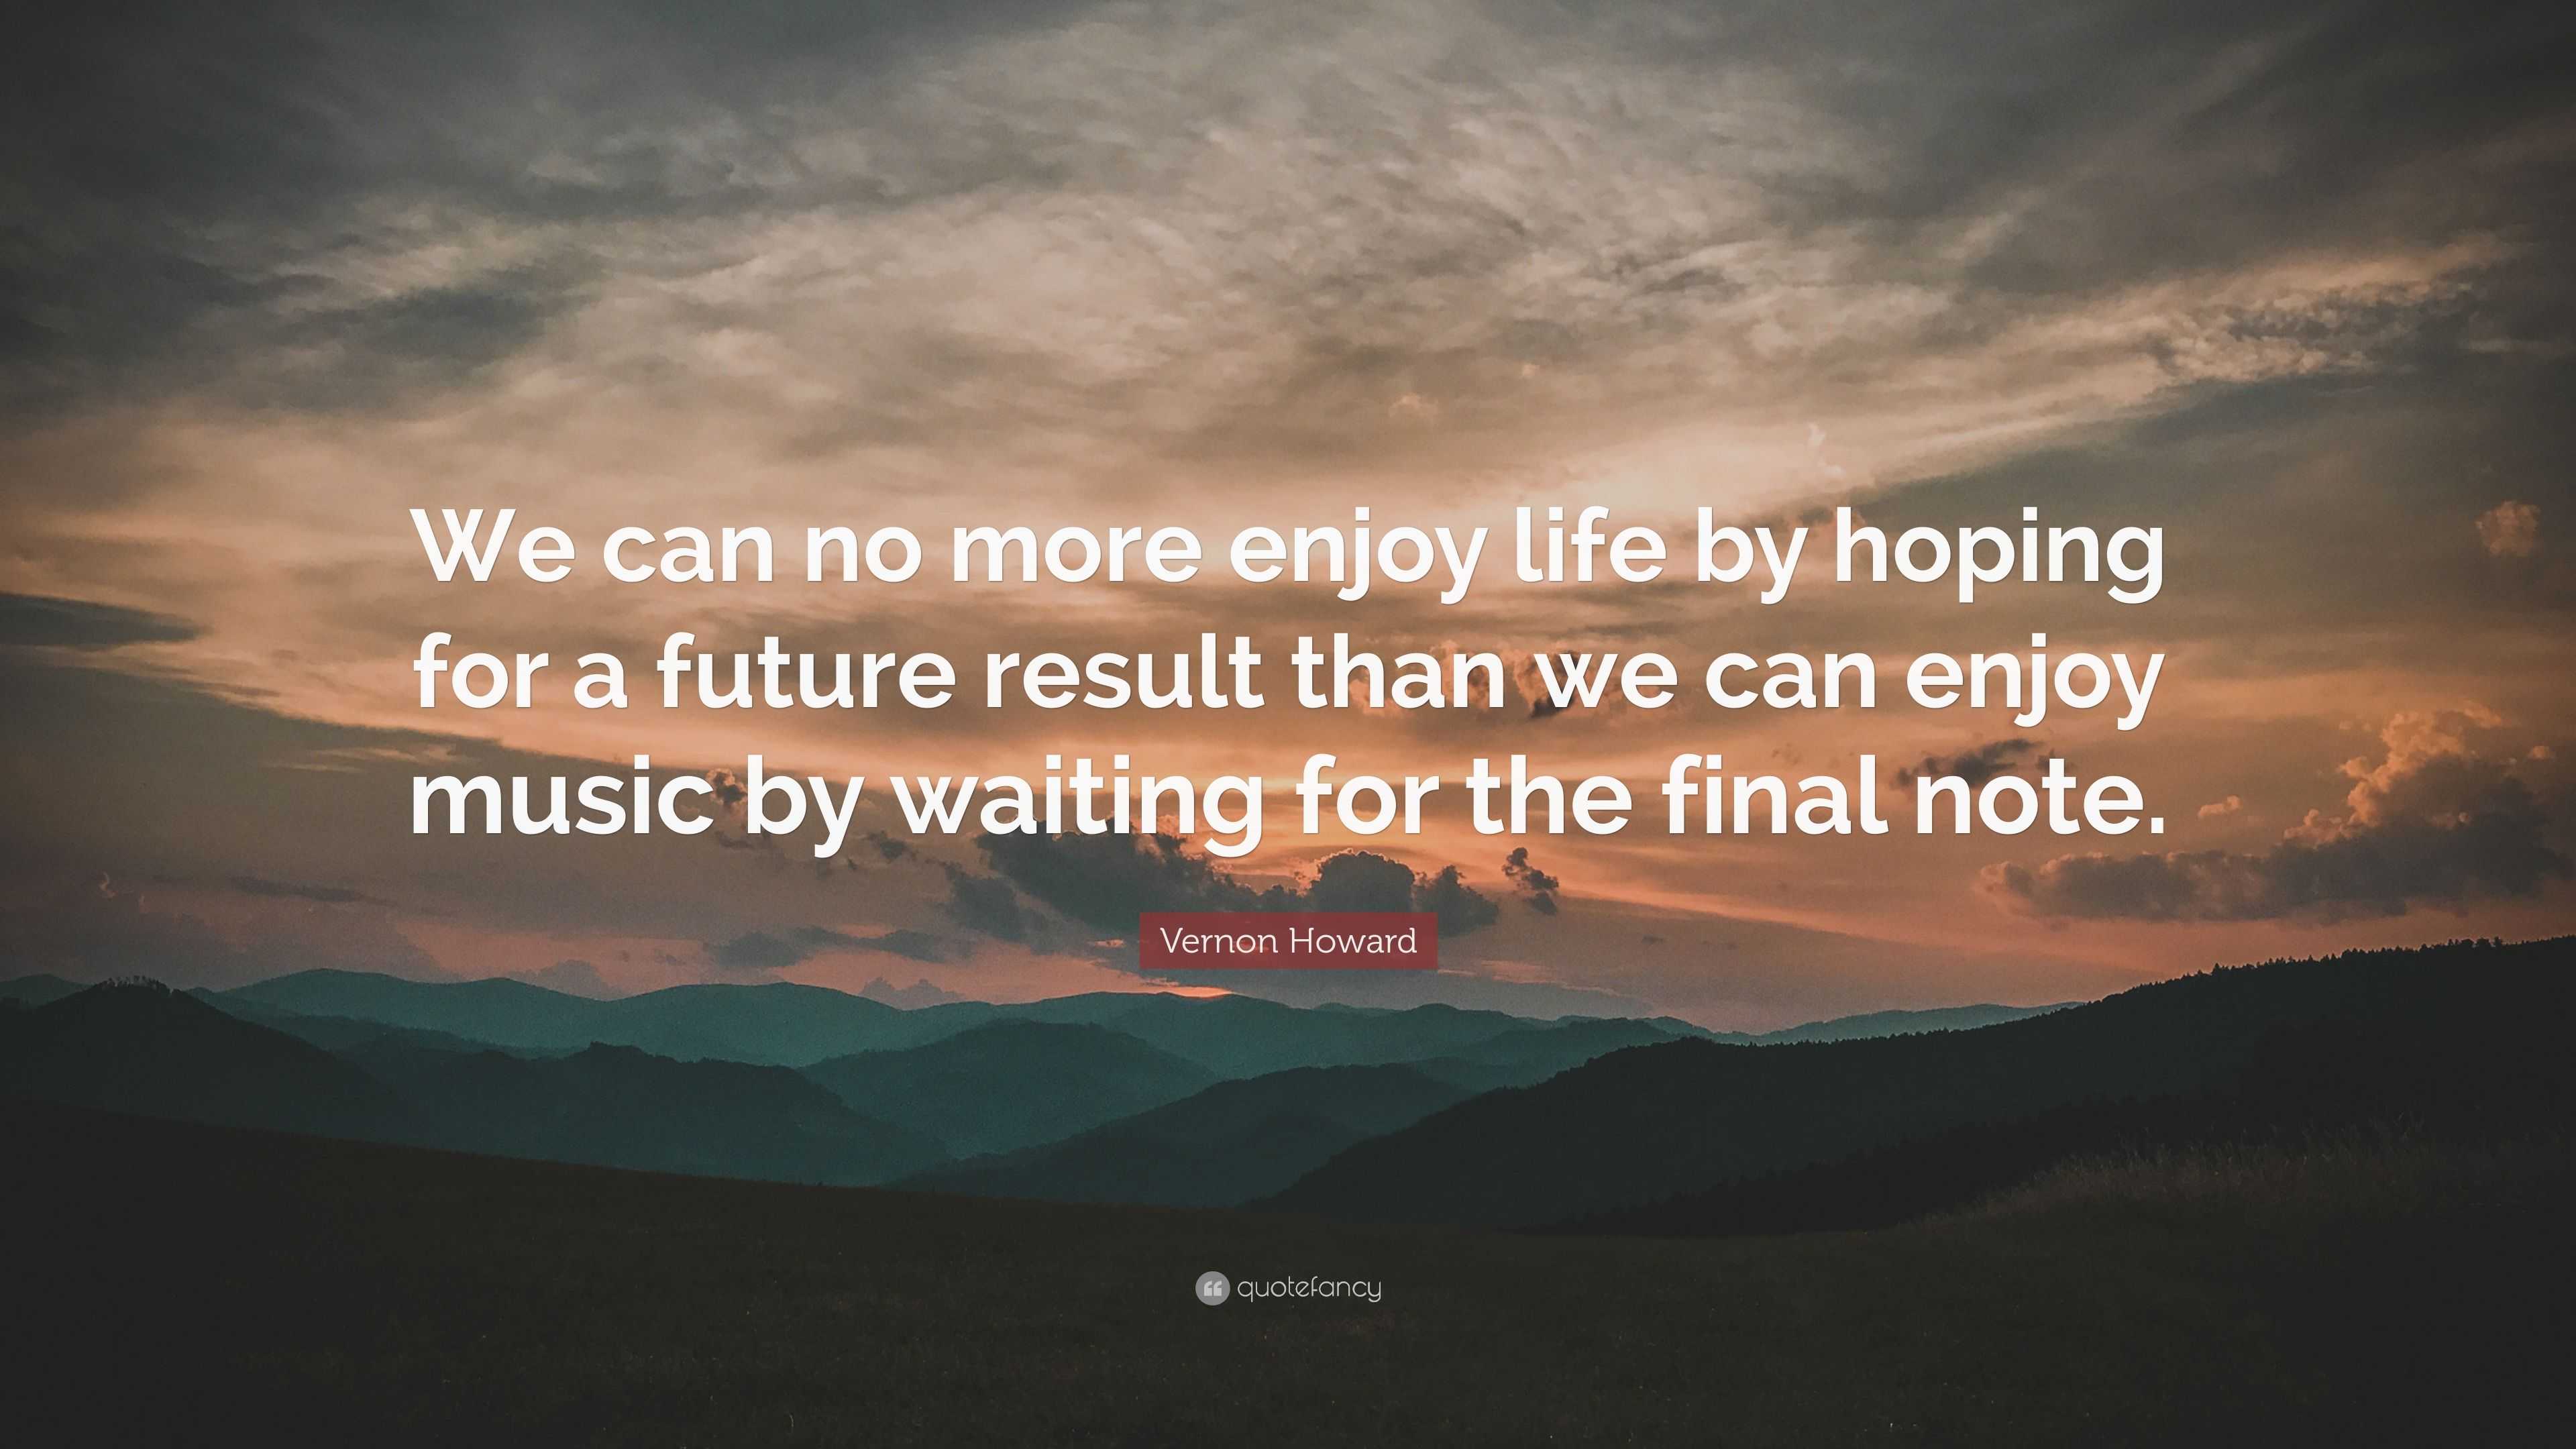 Vernon Howard Quote “We can no more enjoy life by hoping for a future